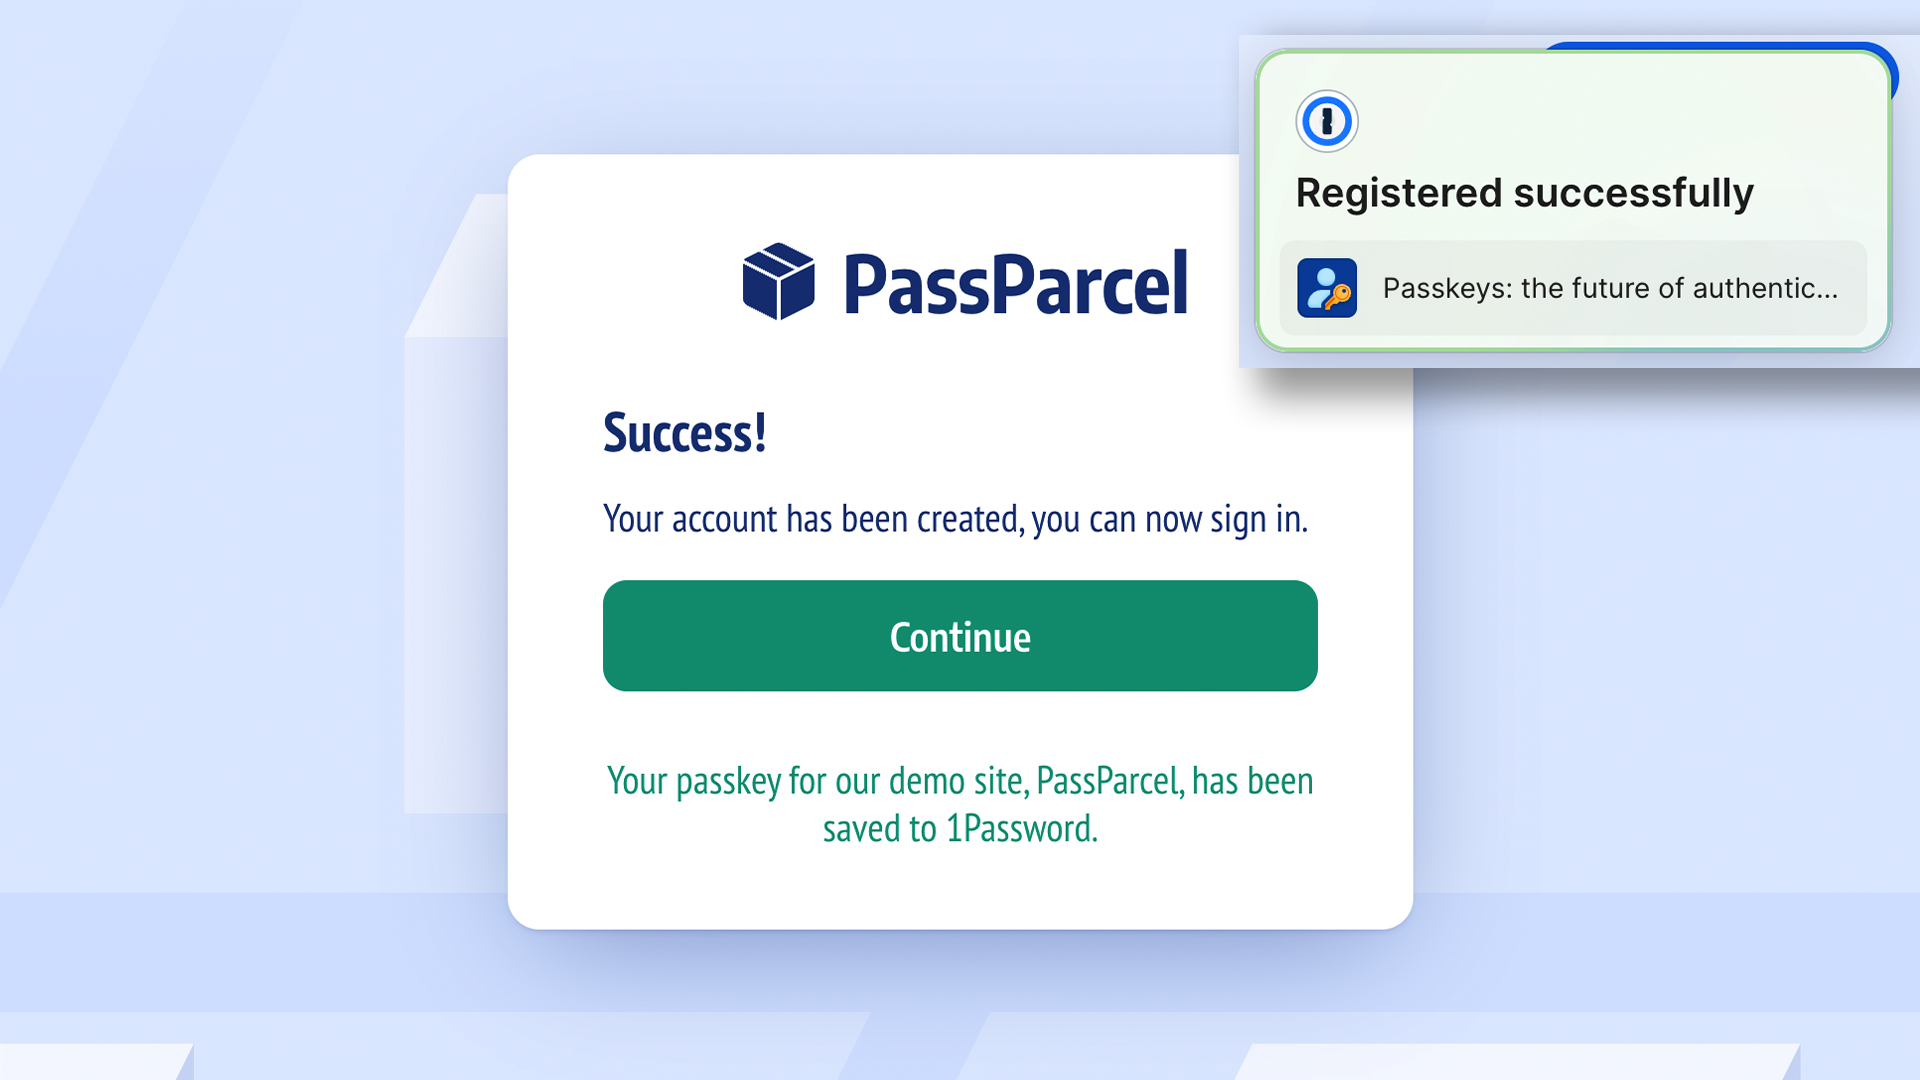 The PassParcel demo showing that I've successfully registered with a Passkey.